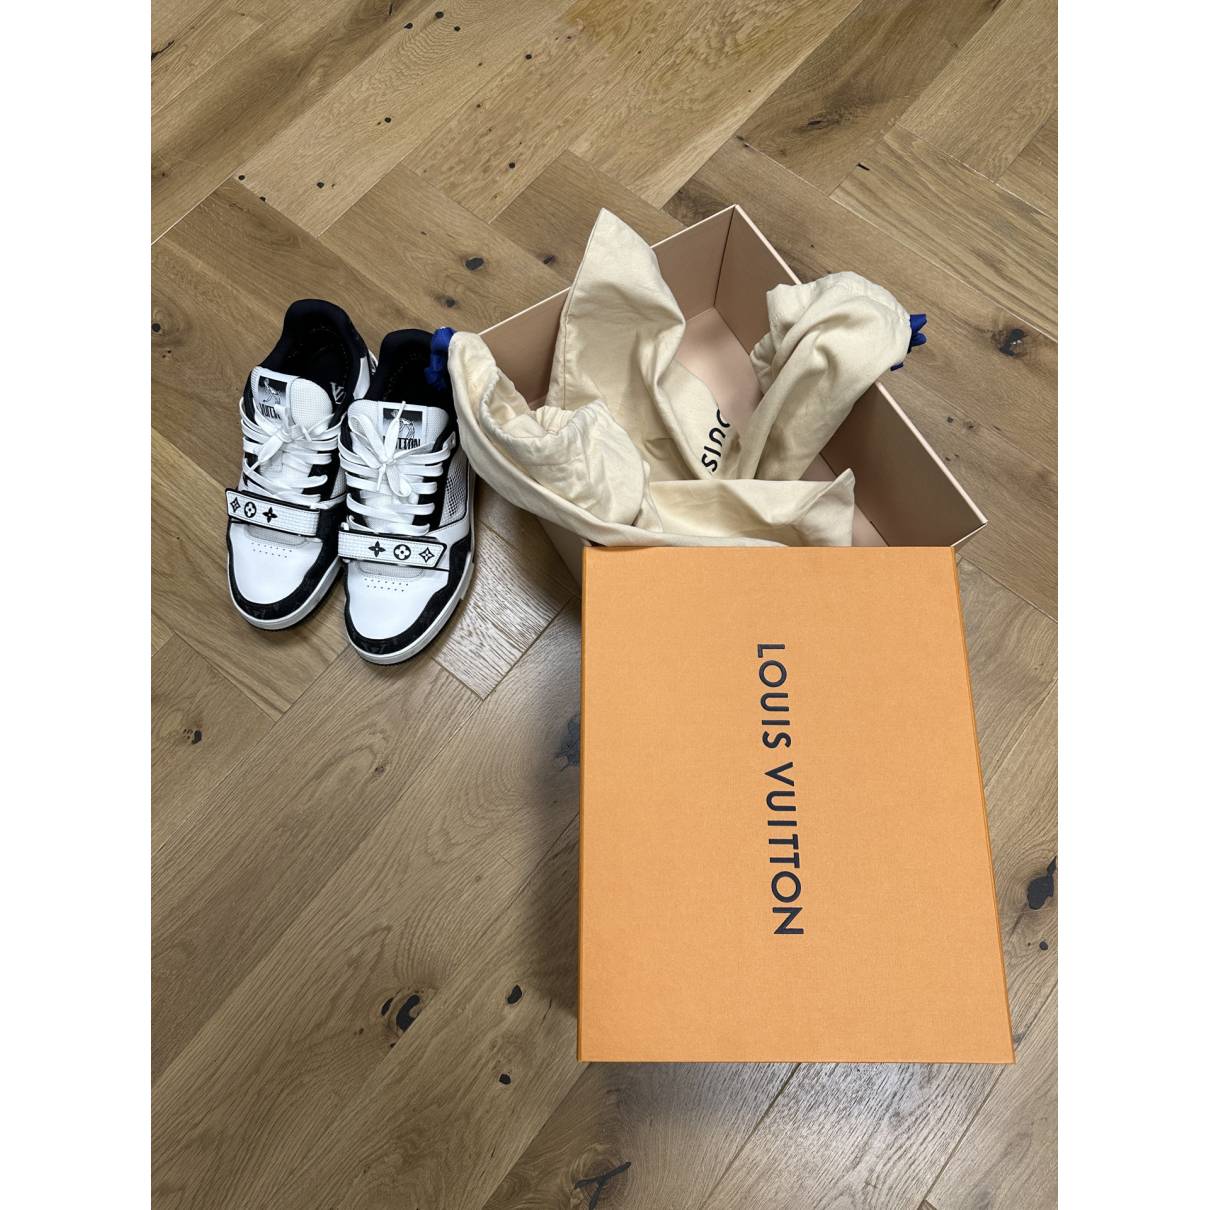 Lv trainer leather low trainers Louis Vuitton White size 41 EU in